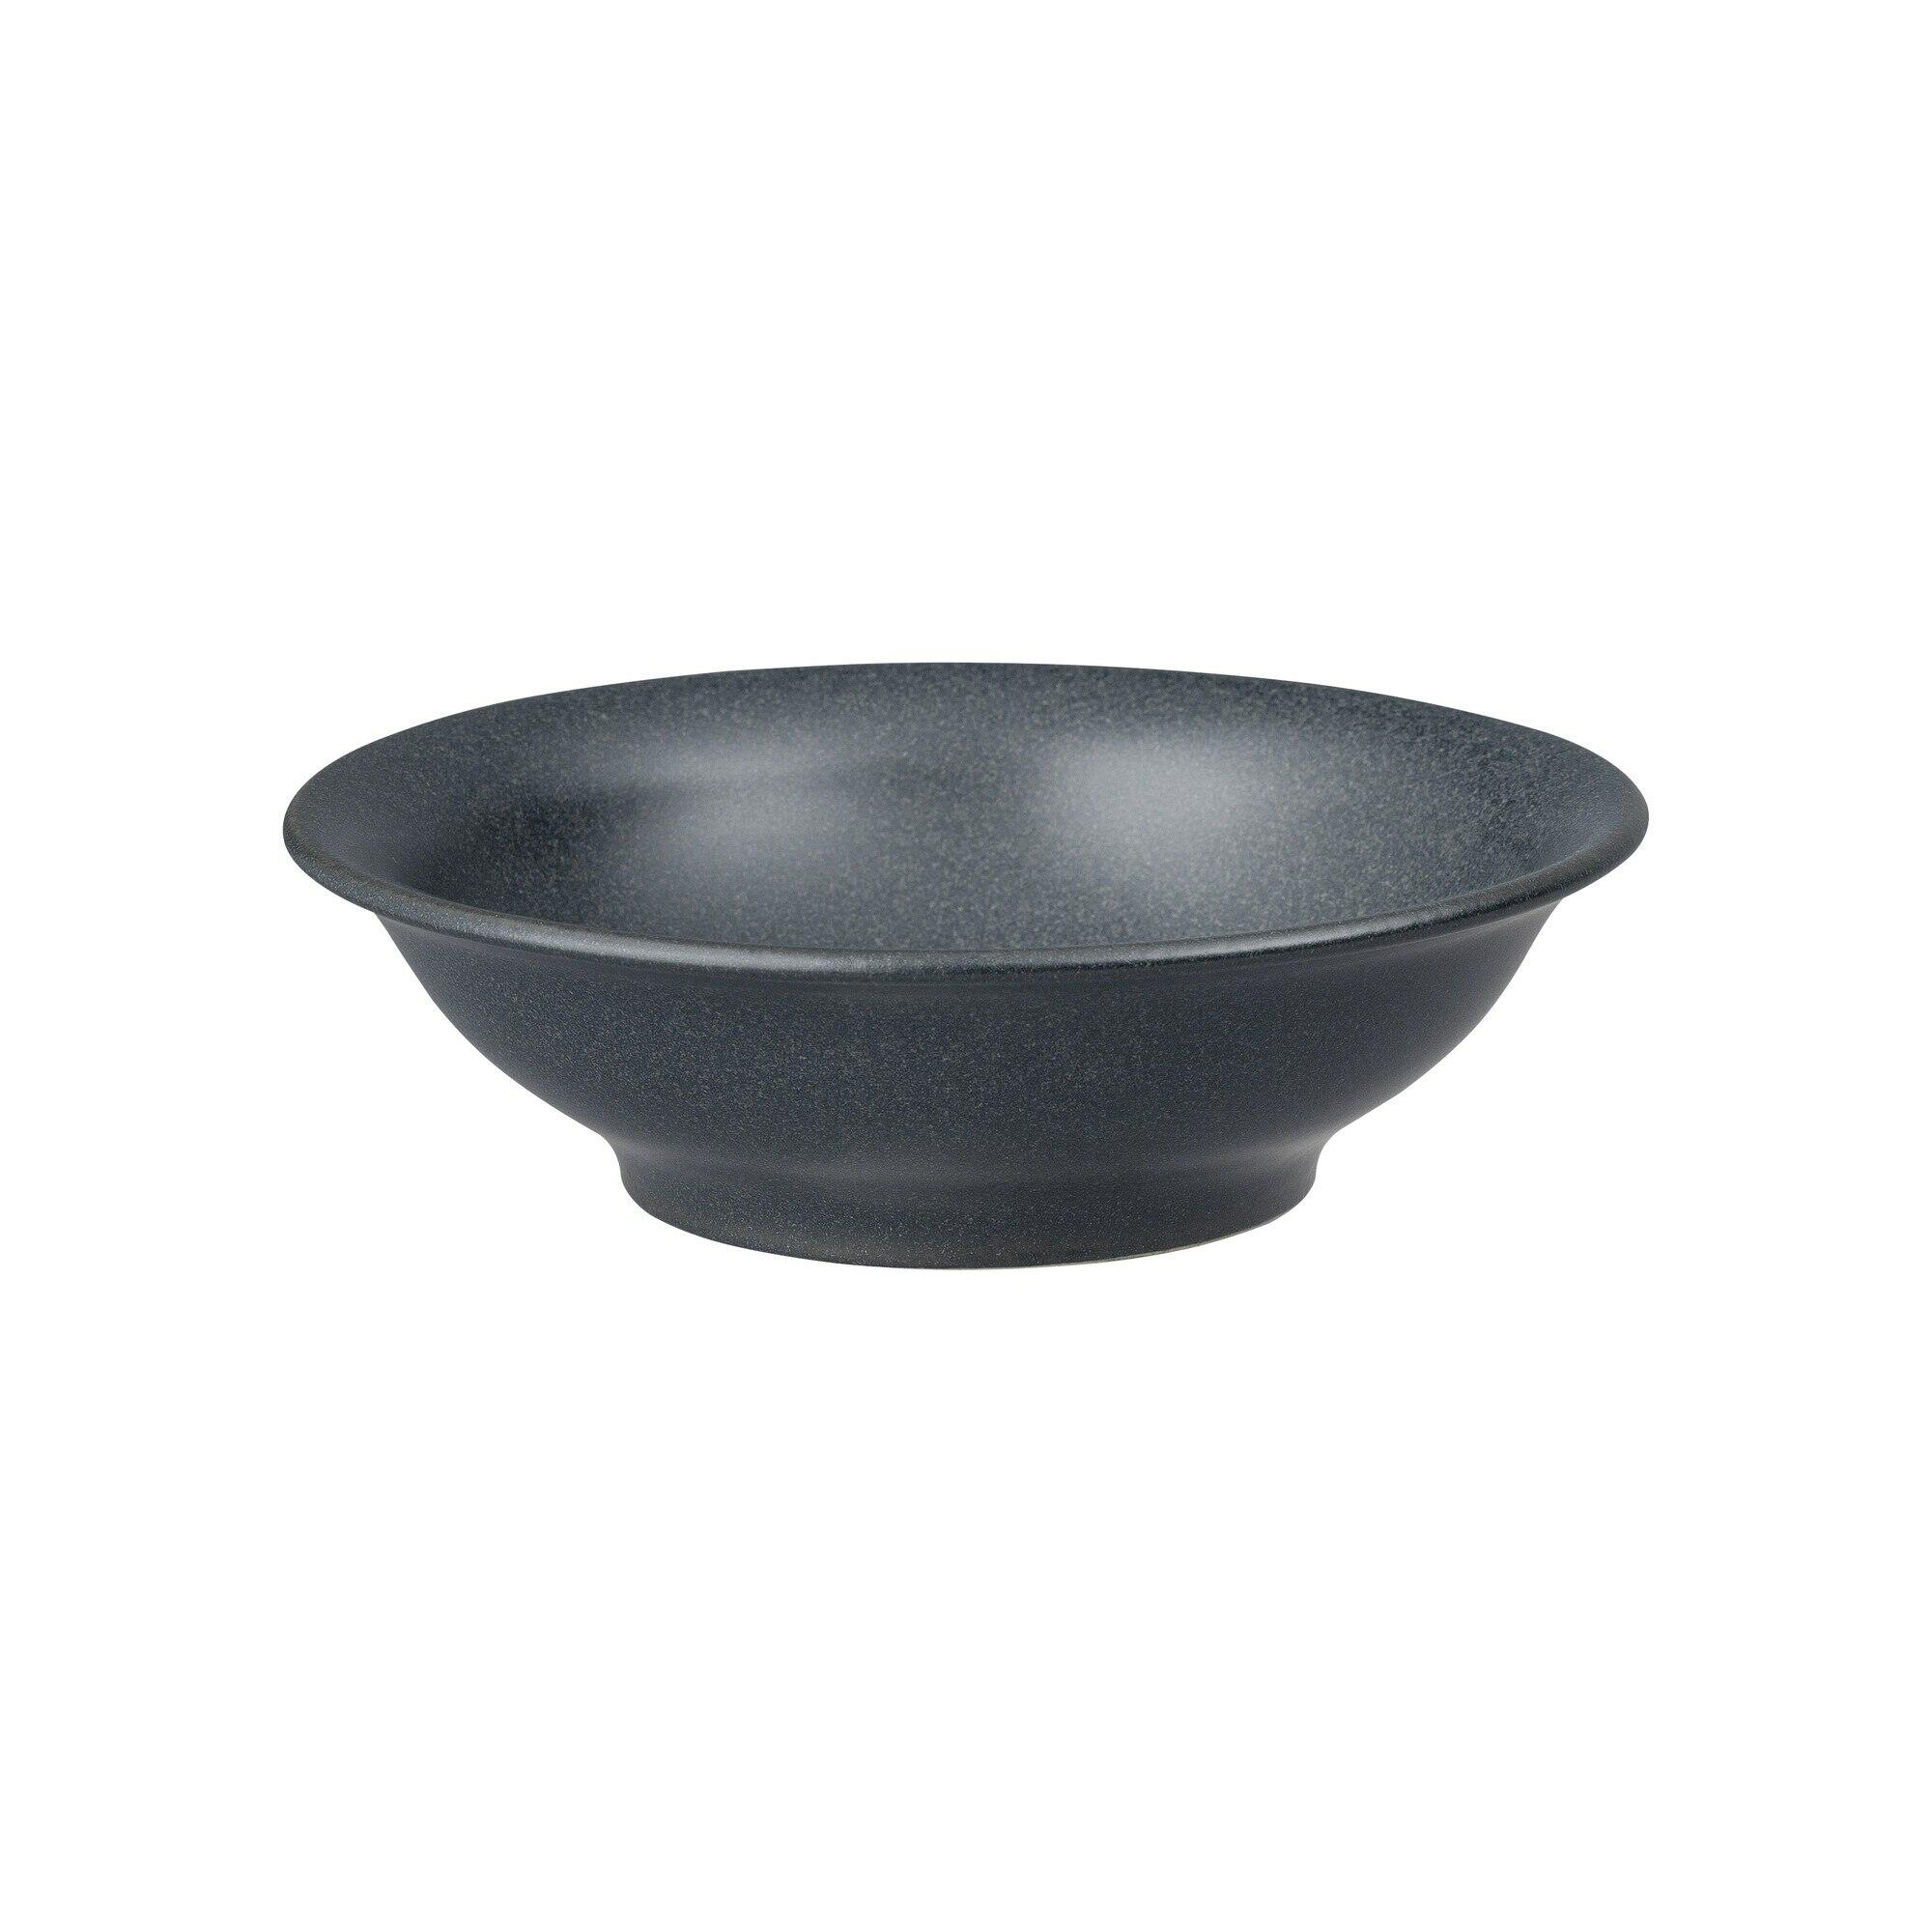 Impression Charcoal Blue Small Shallow Bowl